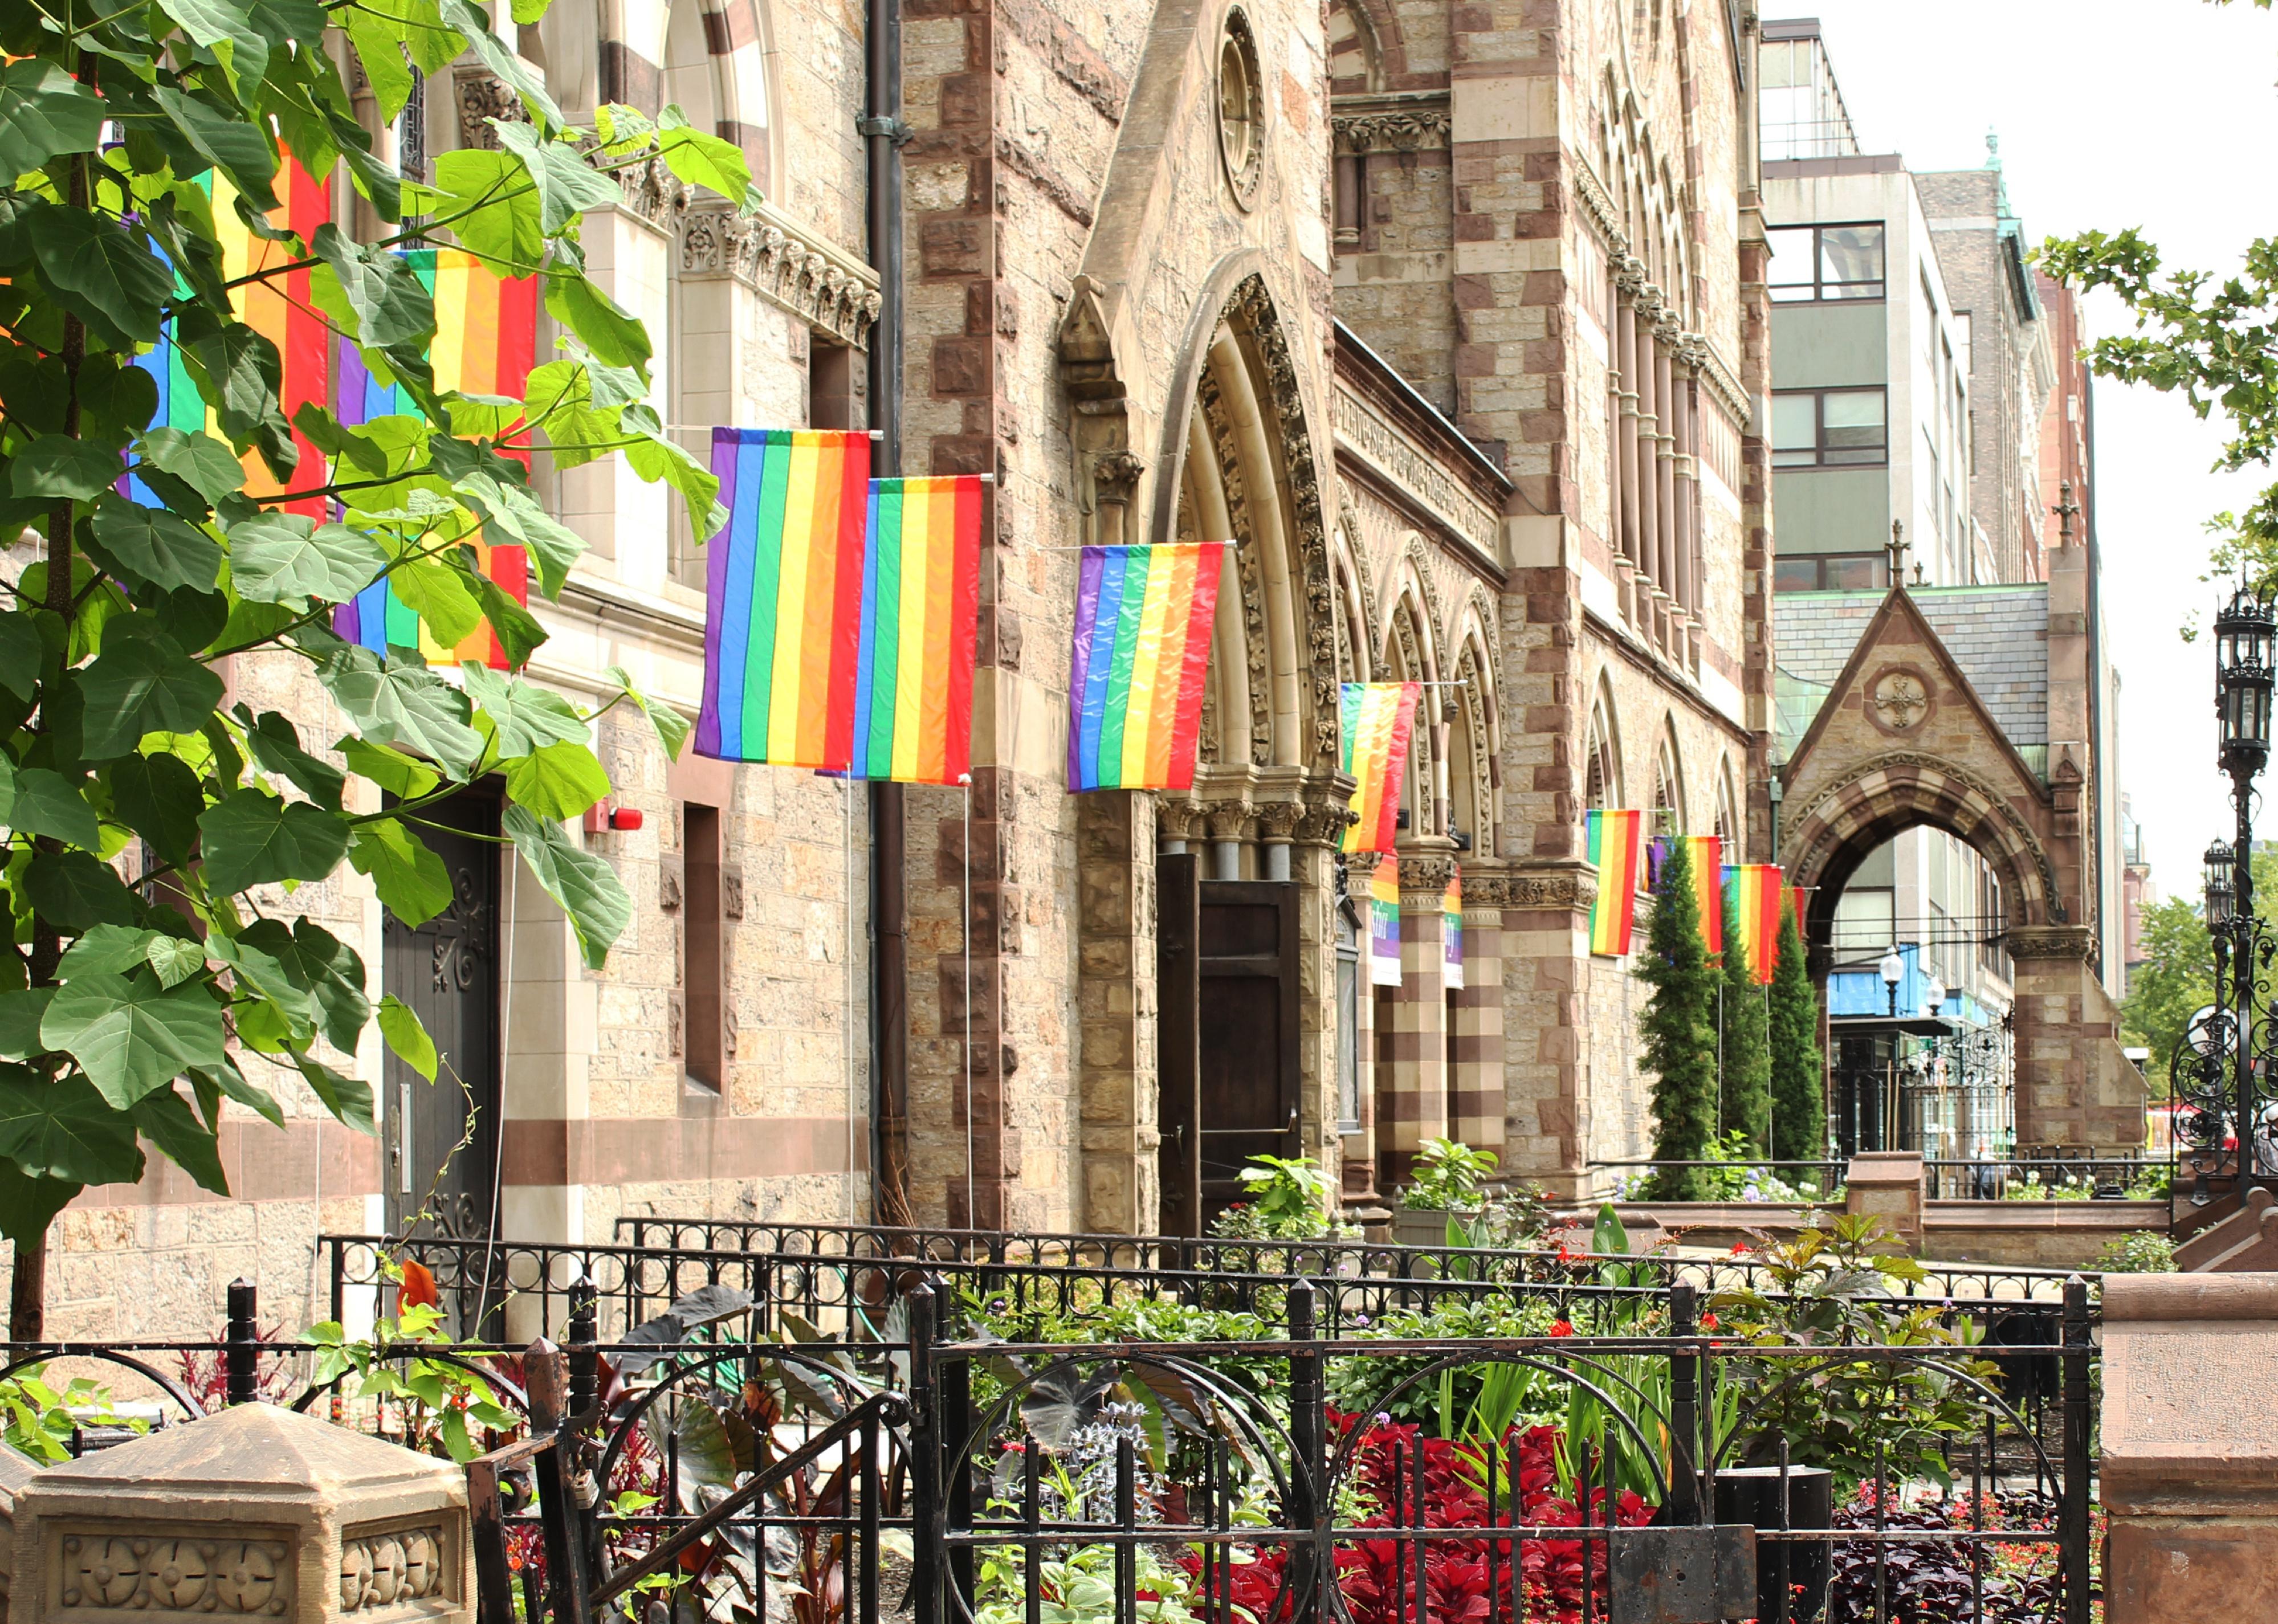 Pride flags on church building in city